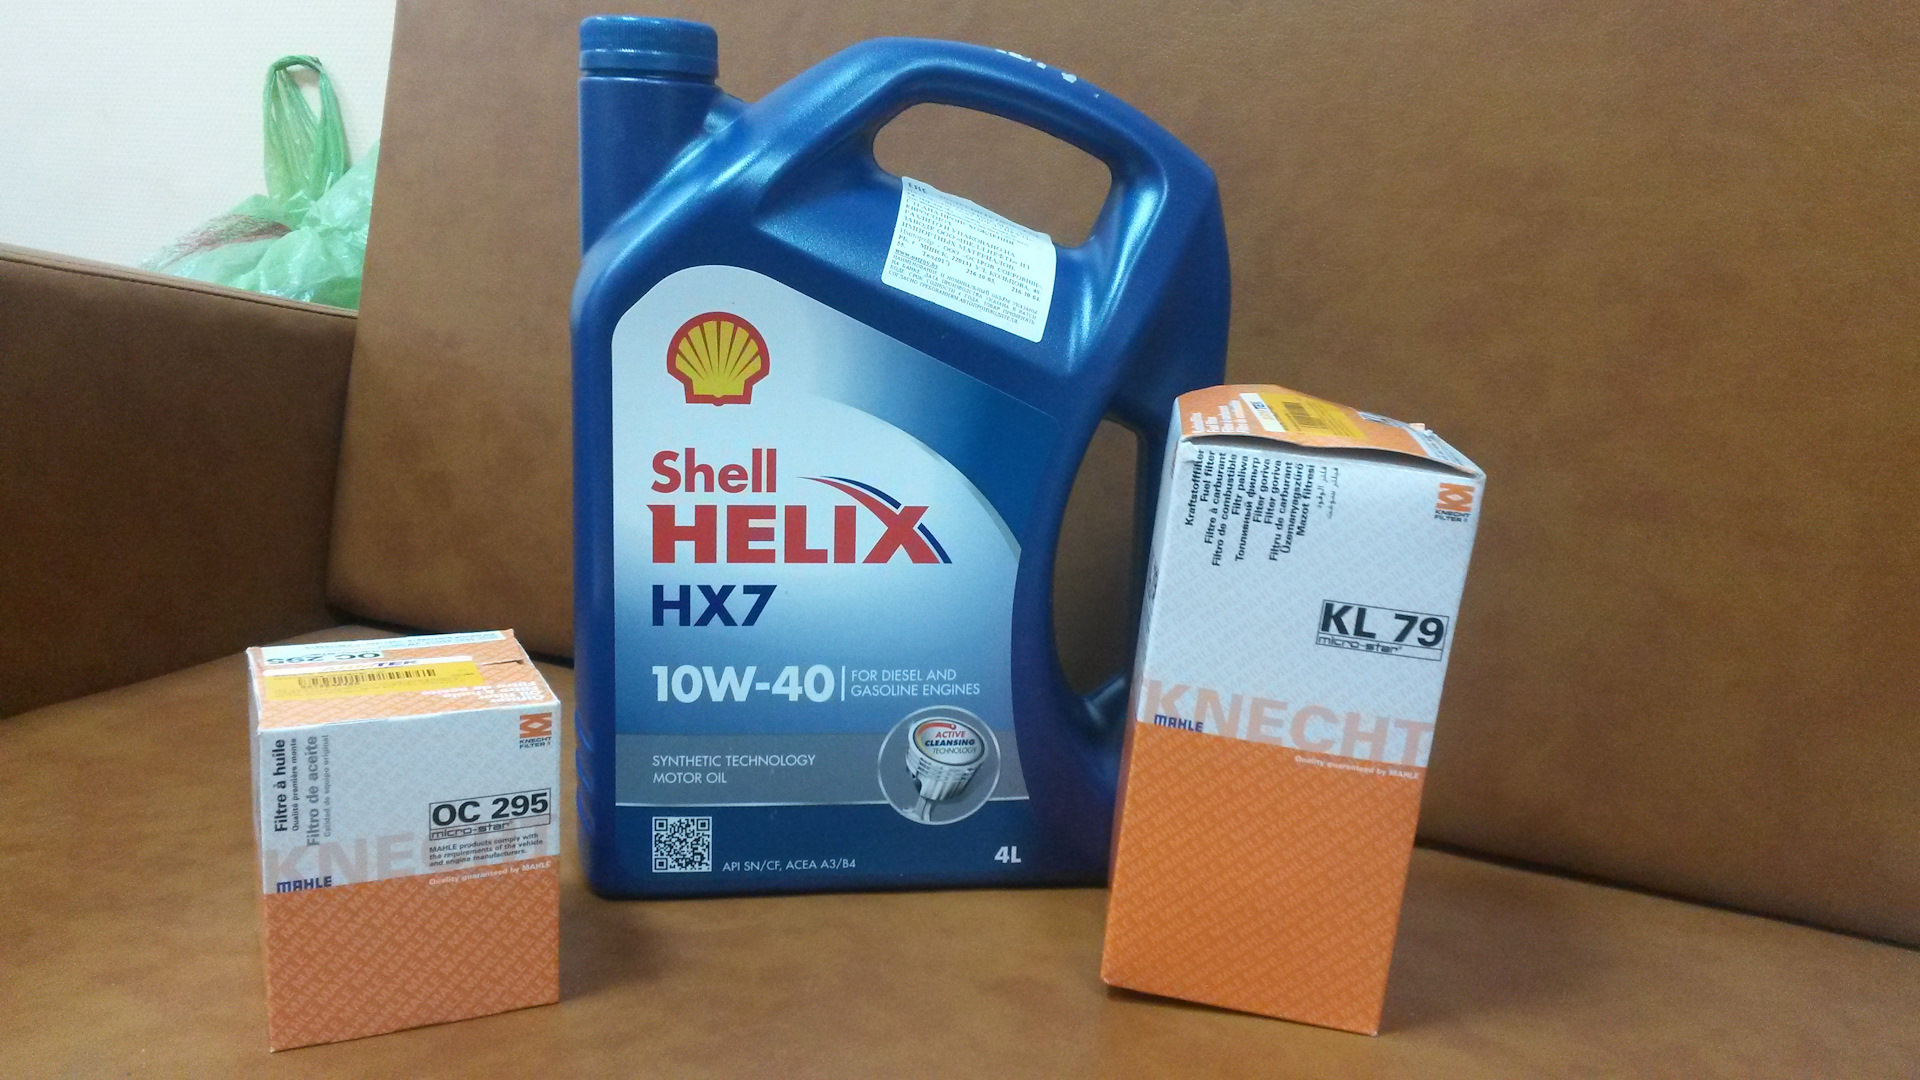 Масло шелл 10. Shell Helix 10w 40 синтетика. Шелл 10w 40 полусинтетика. Масло Шелл Хеликс 10w 40 полусинтетика. Shell 10w 40 приозиства.